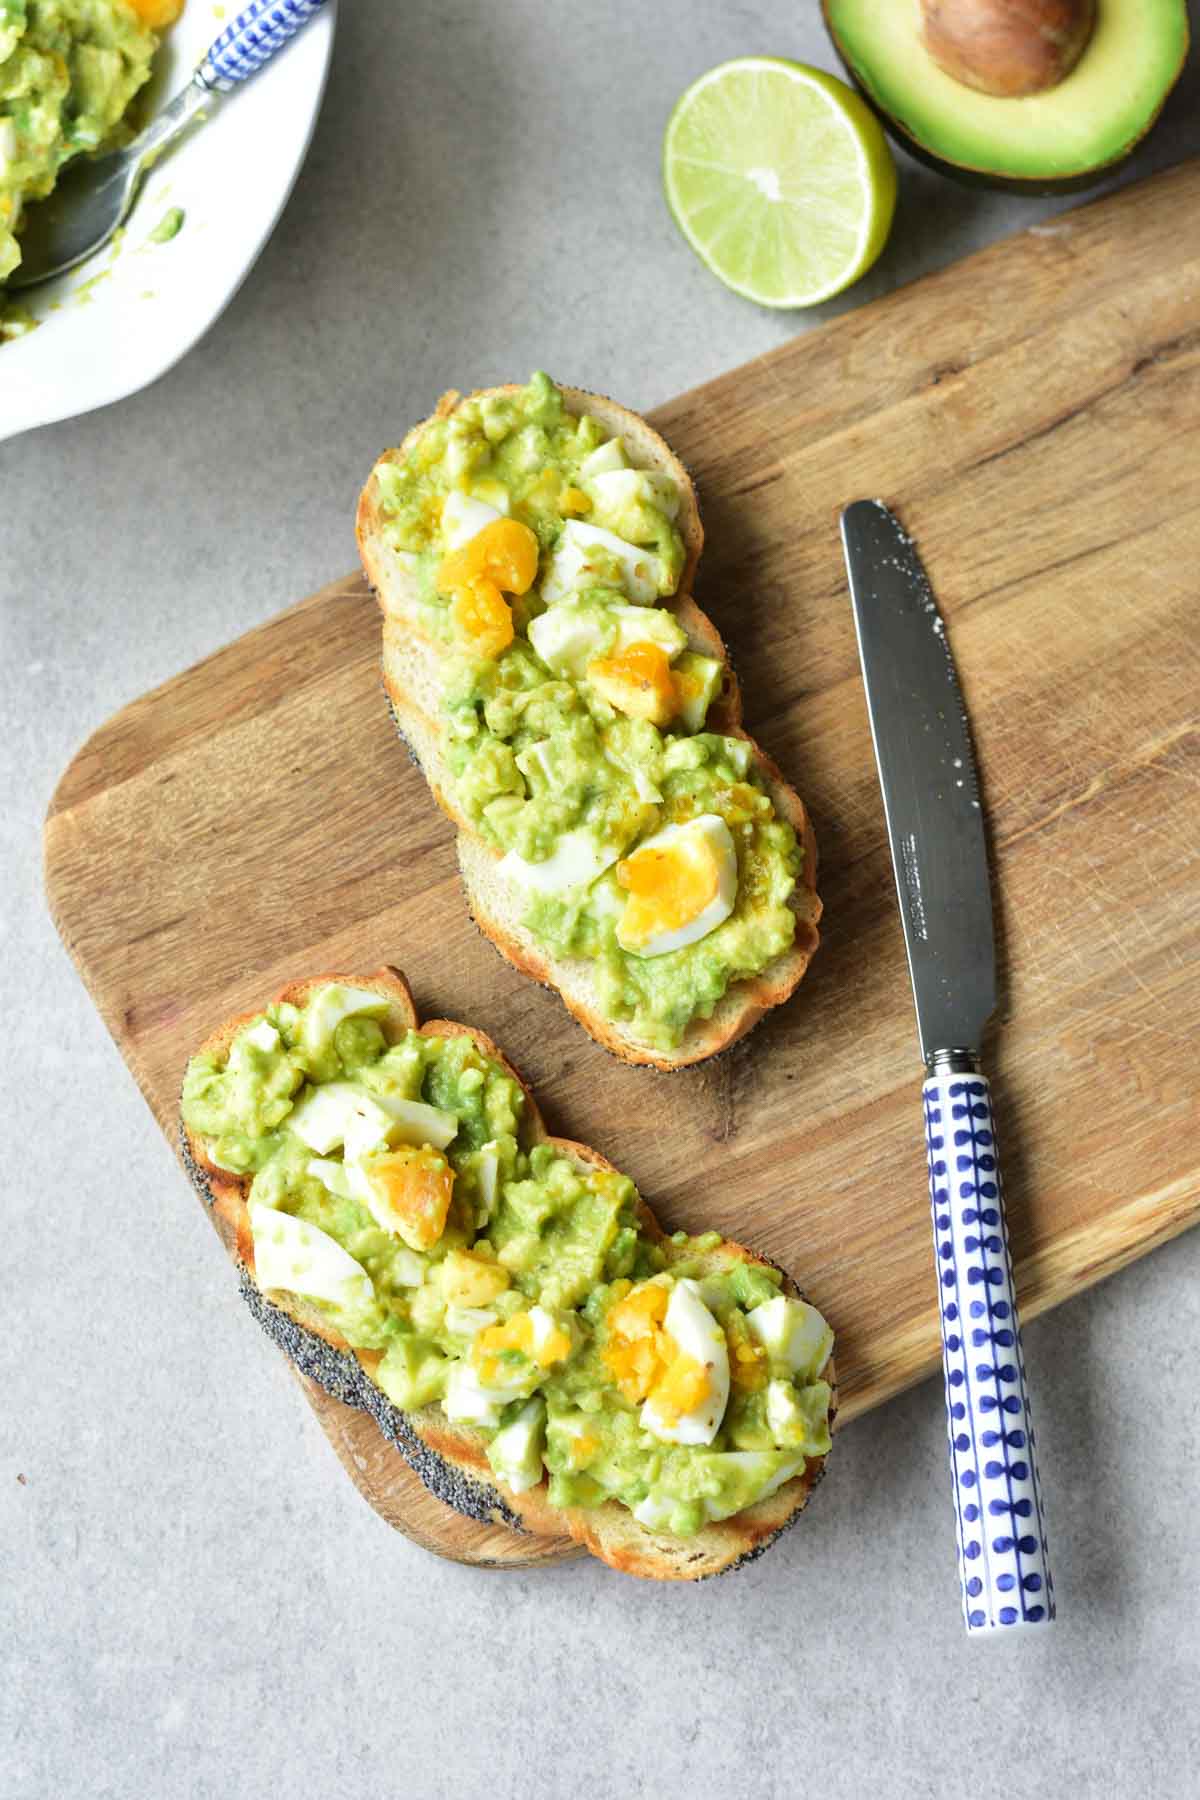 Two slices bread with avocado egg salad on a wooden board.